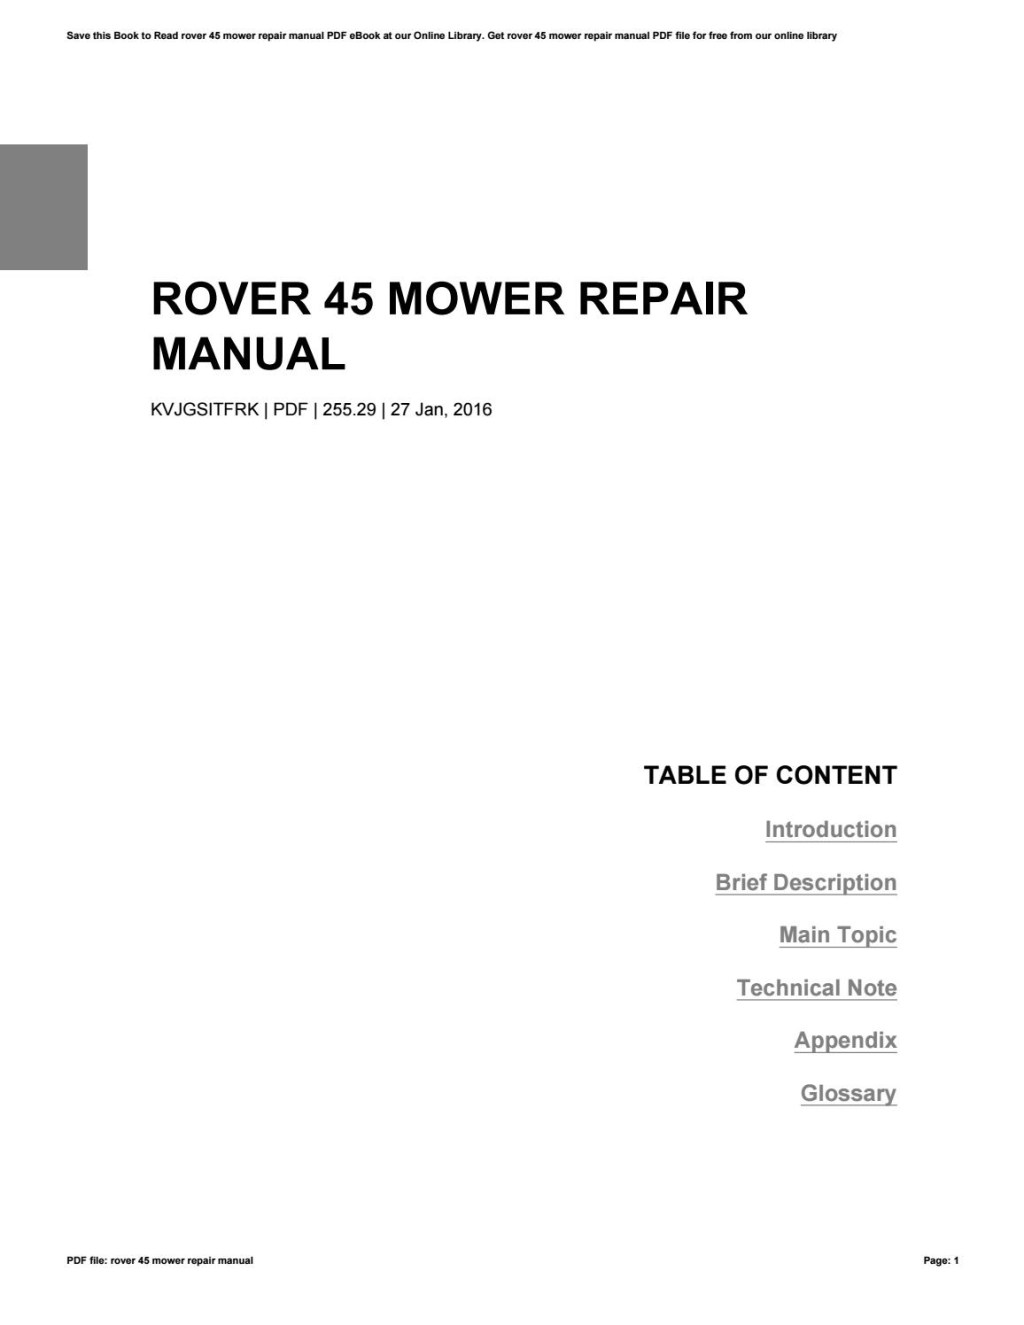 Picture of: Rover  mower repair manual by RoyParsley – Issuu